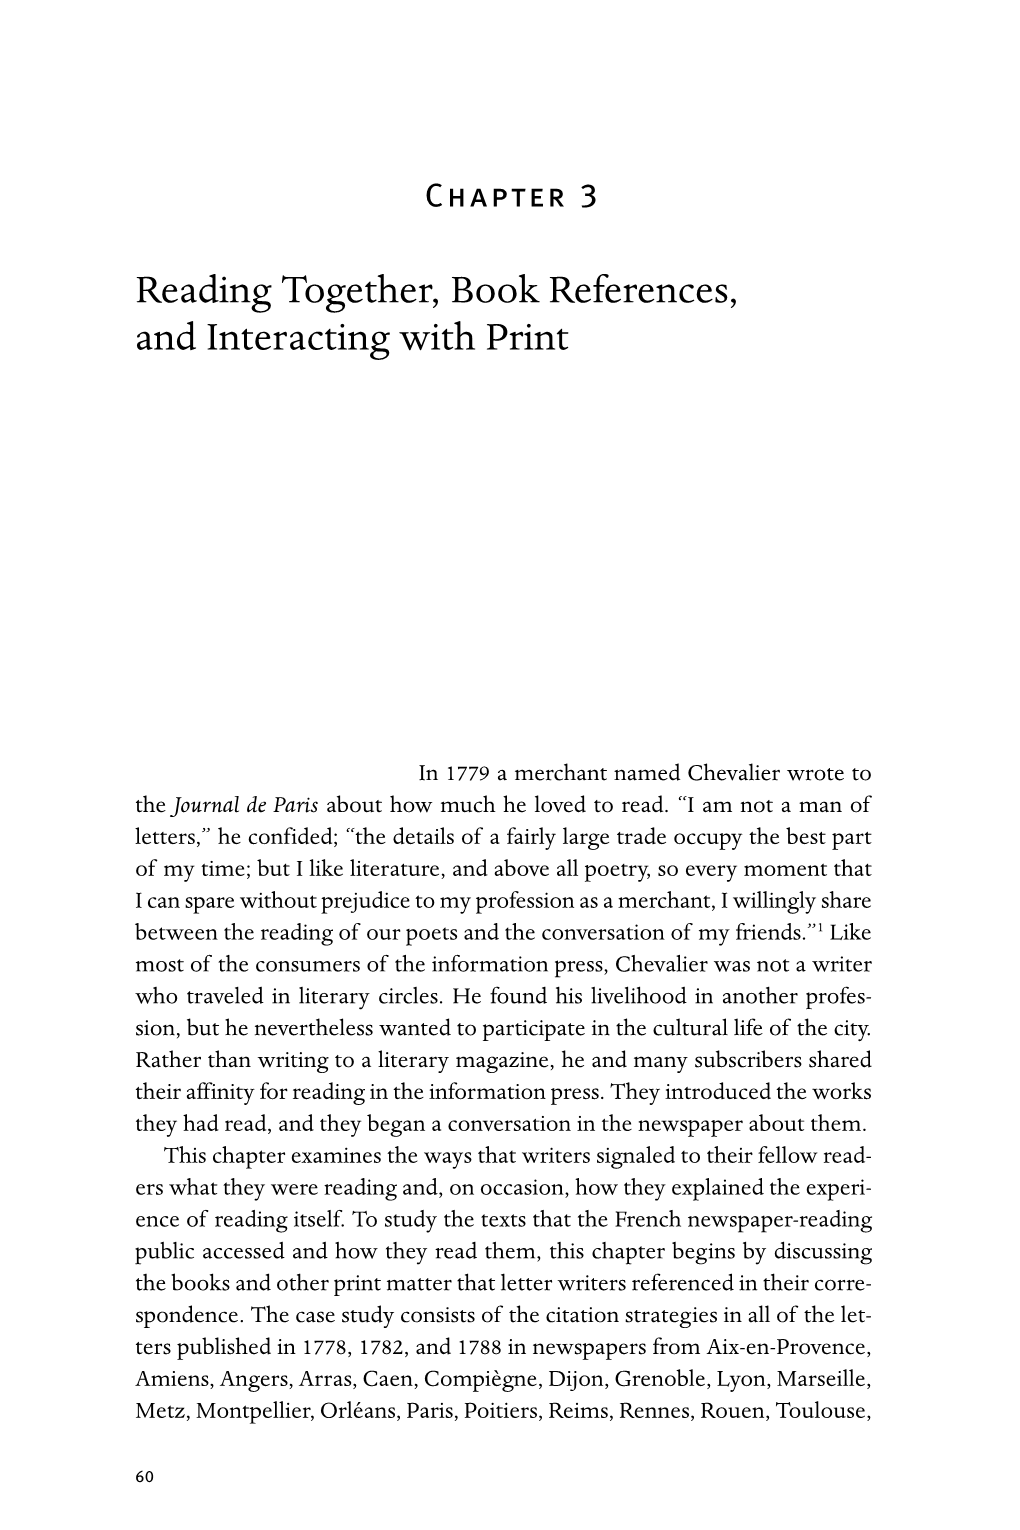 Reading Together, Book References, and Interacting with Print